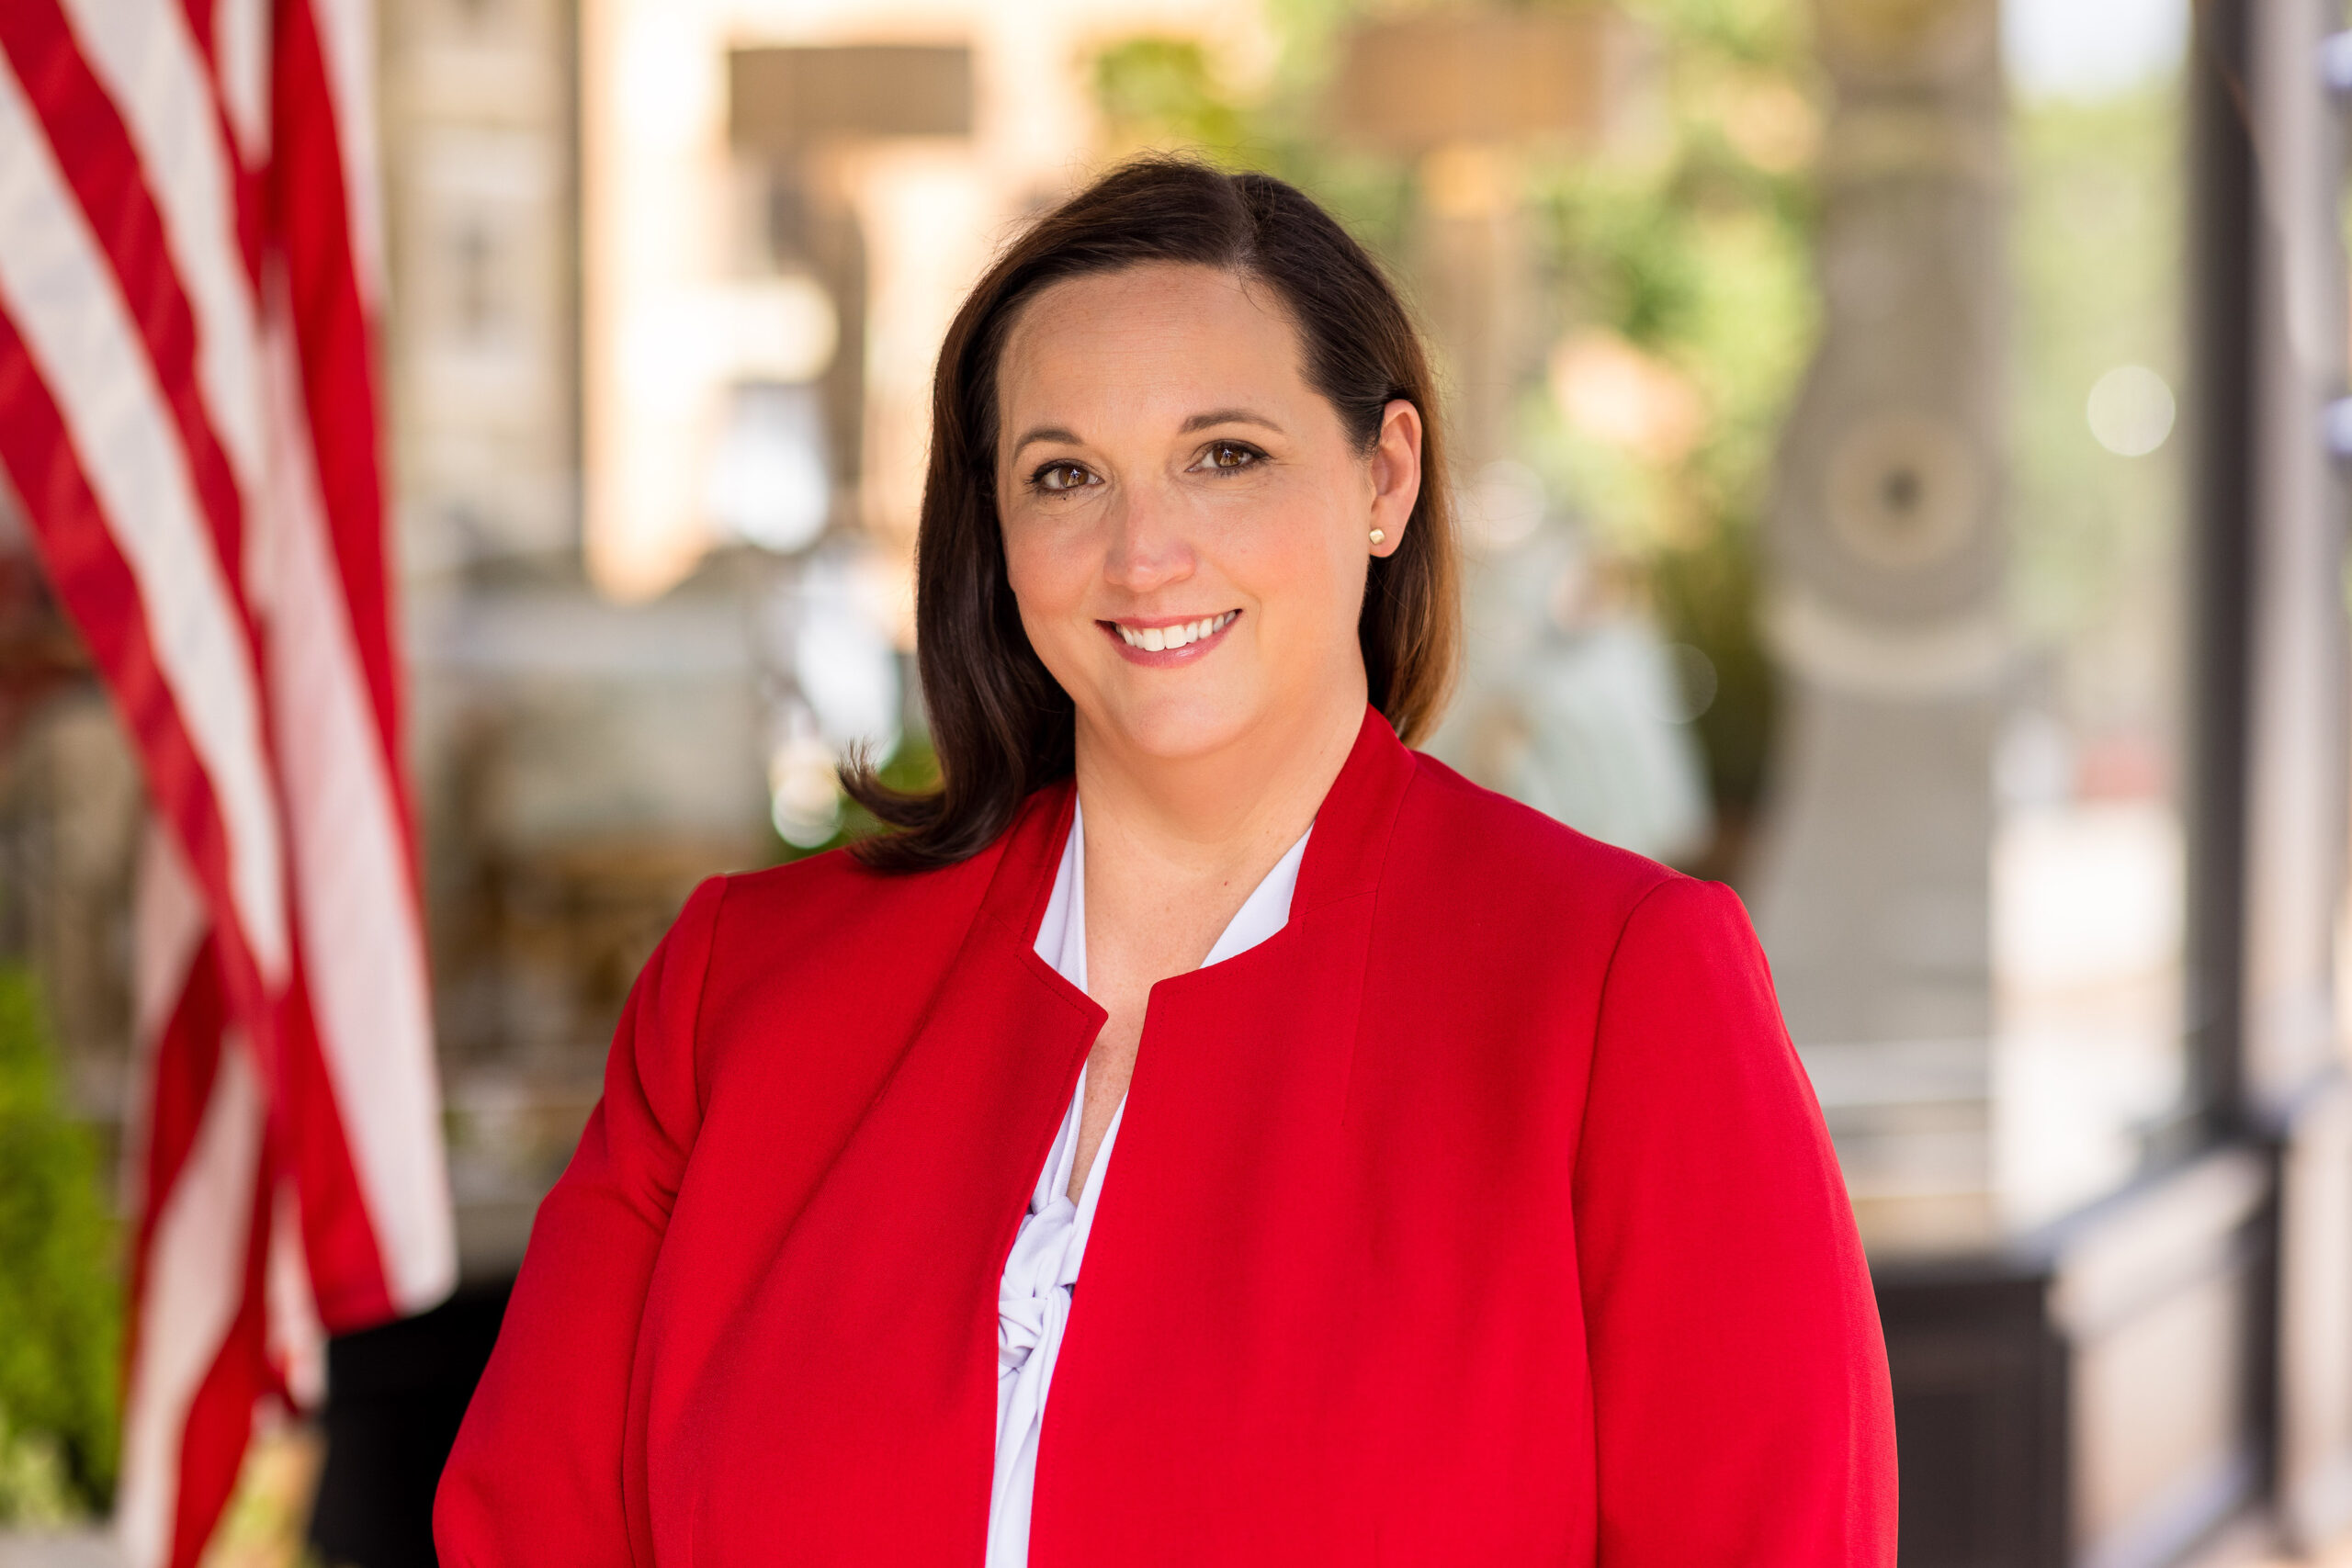 Jessica Ventiere Announces Campaign for District Attorney of Lee County